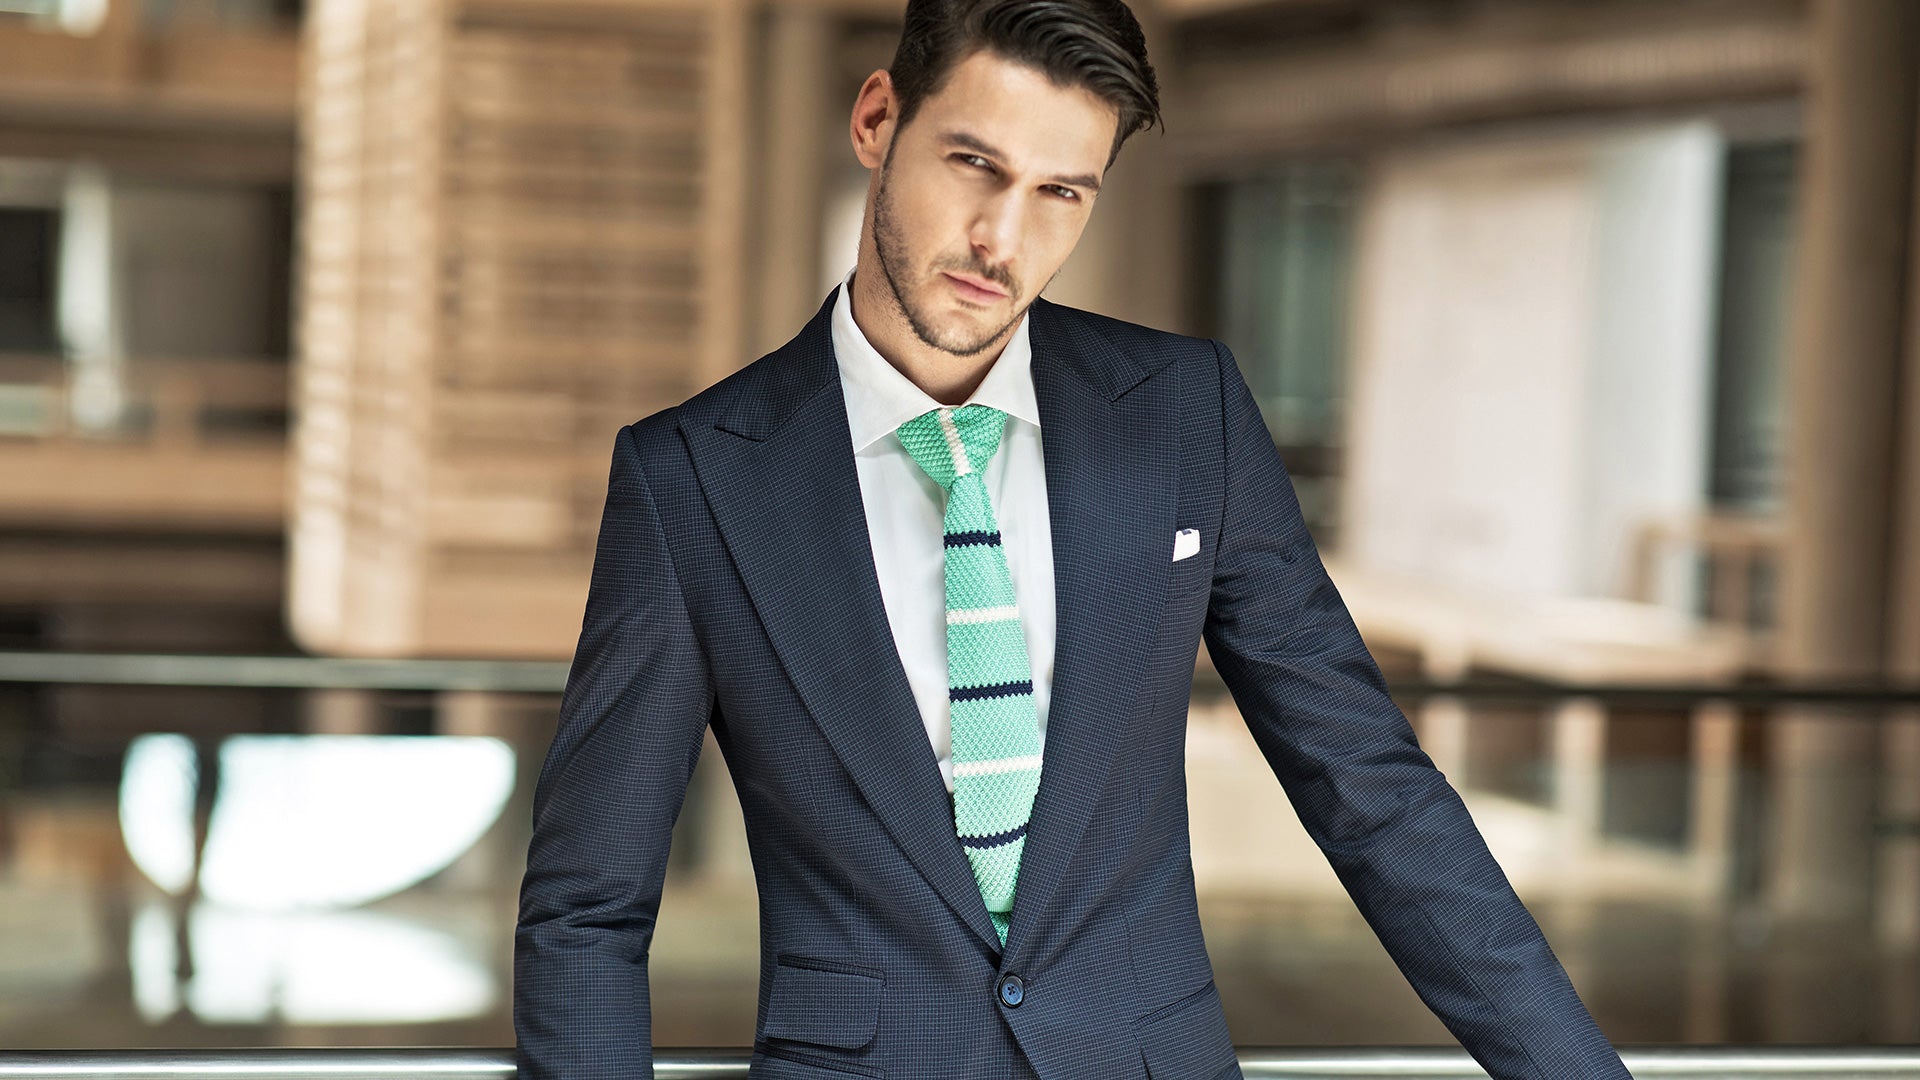 MILD TEXTURE ON THIS SUIT MAKES IT VERY IMPRESSIVE. SINGLE BREASTED FORMAL BLUISH GREY